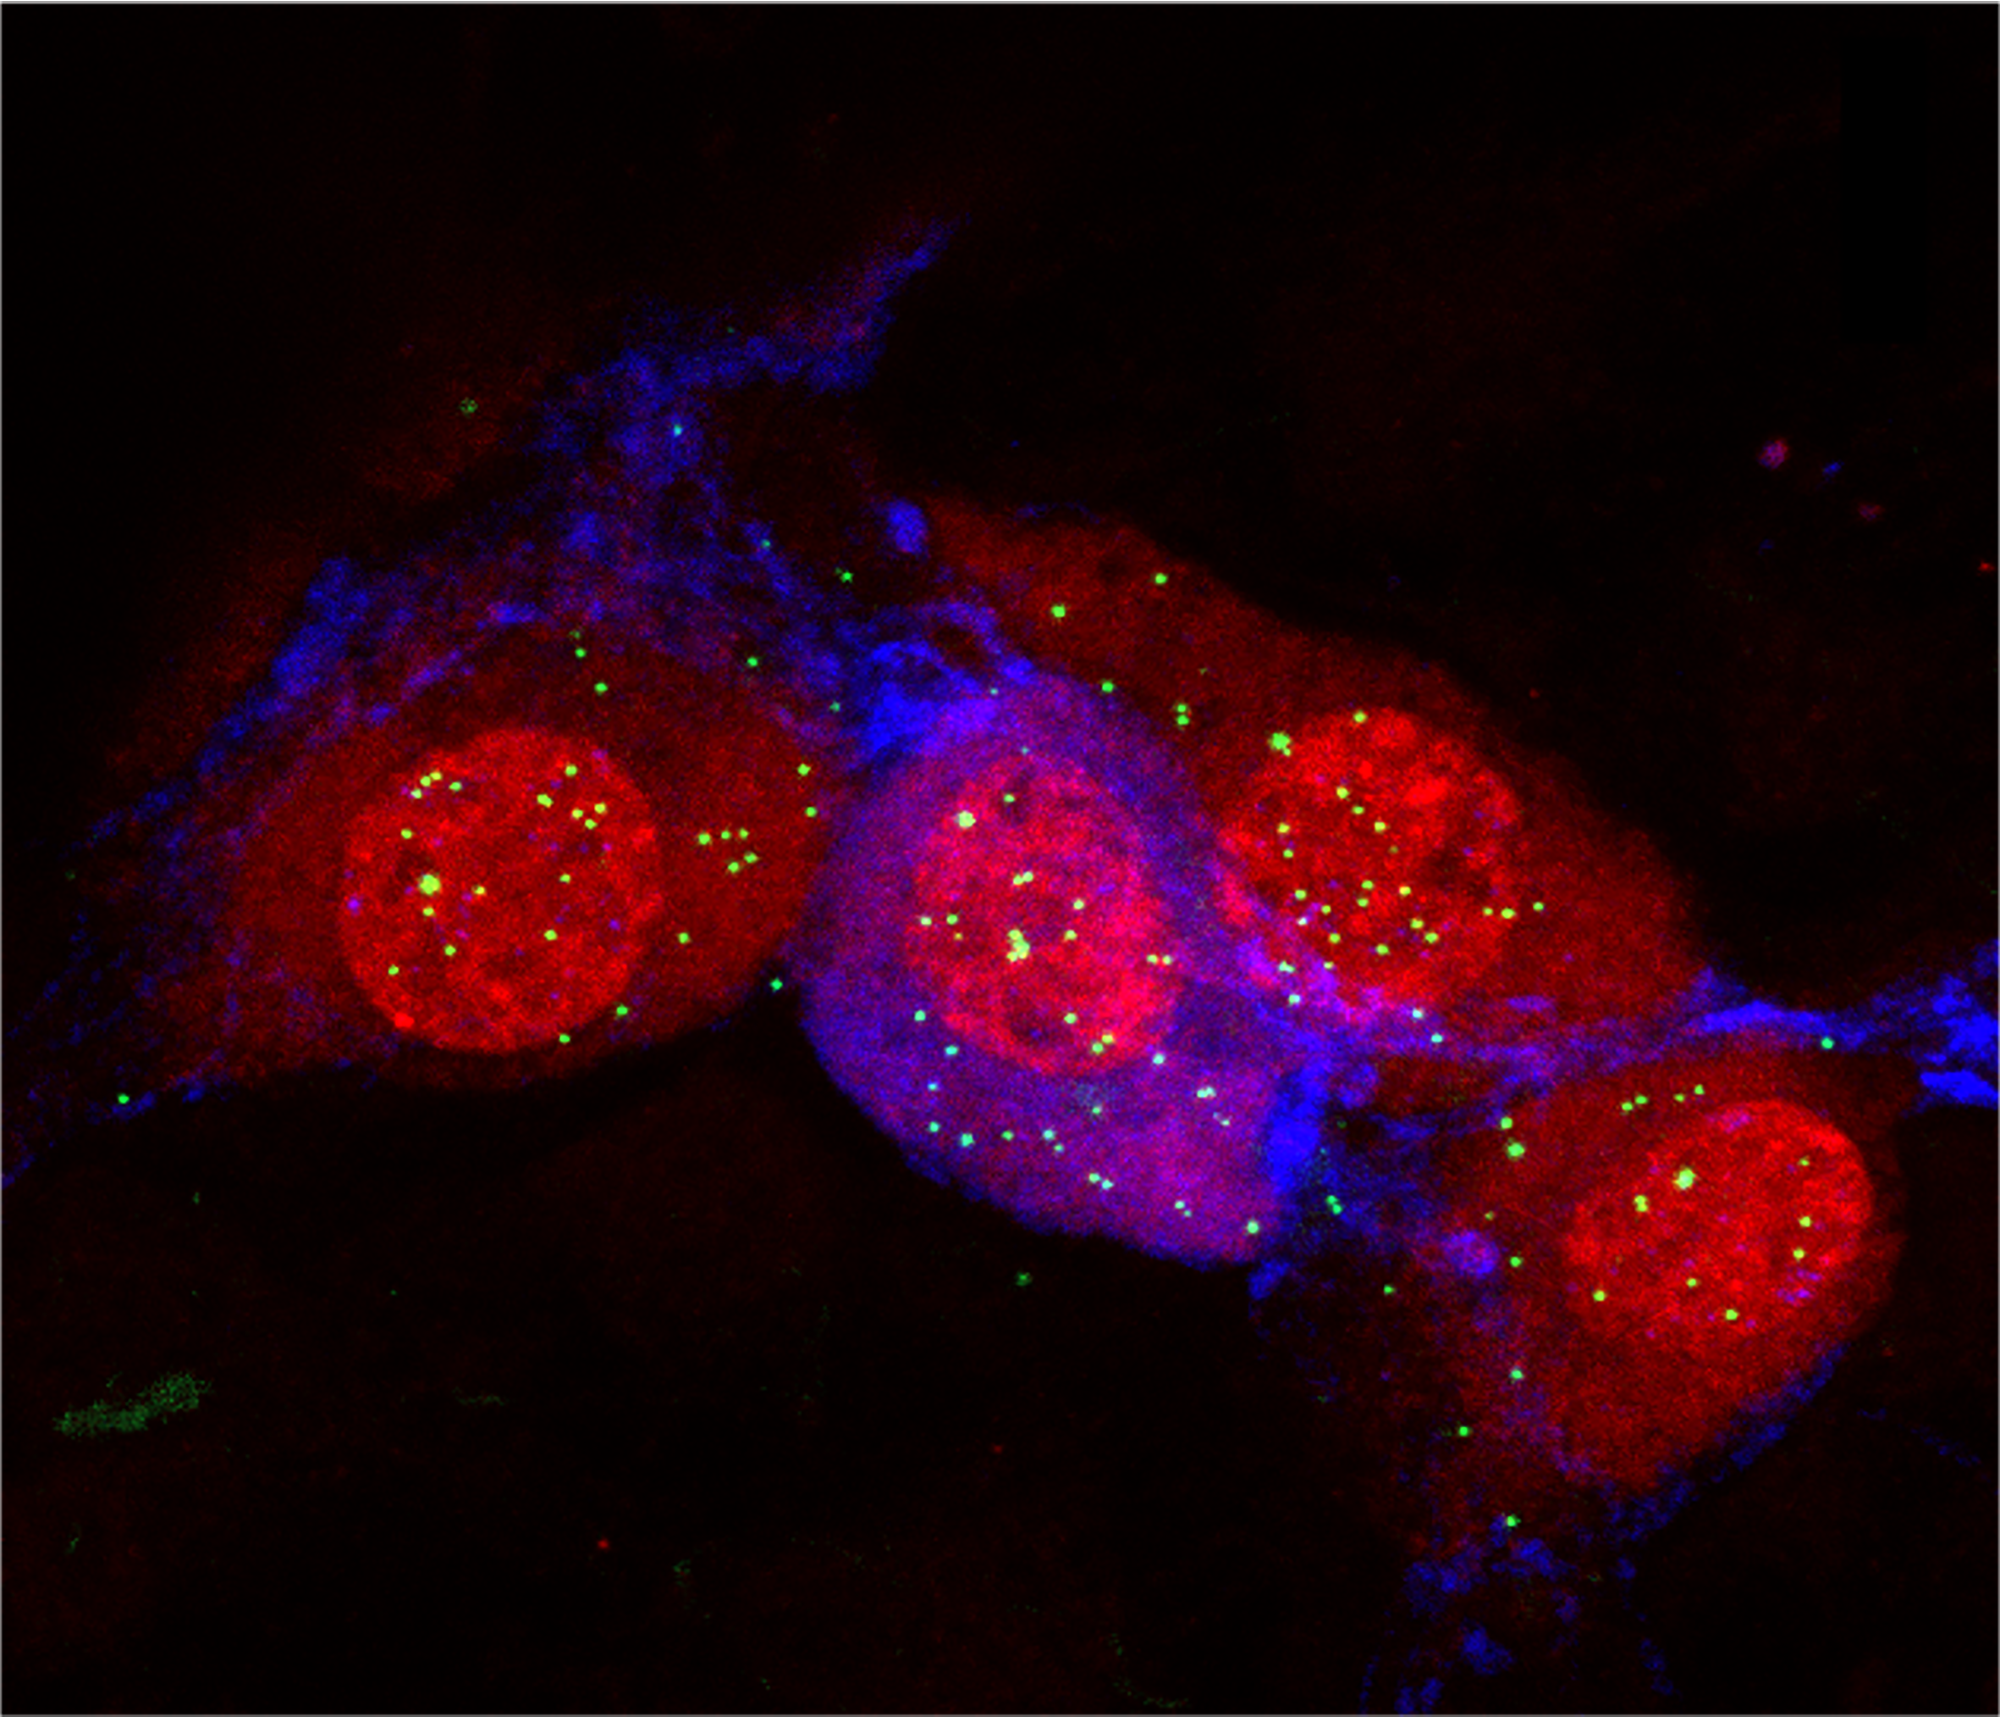 Research image of neurons in the small intestine of a wildtype mouse.